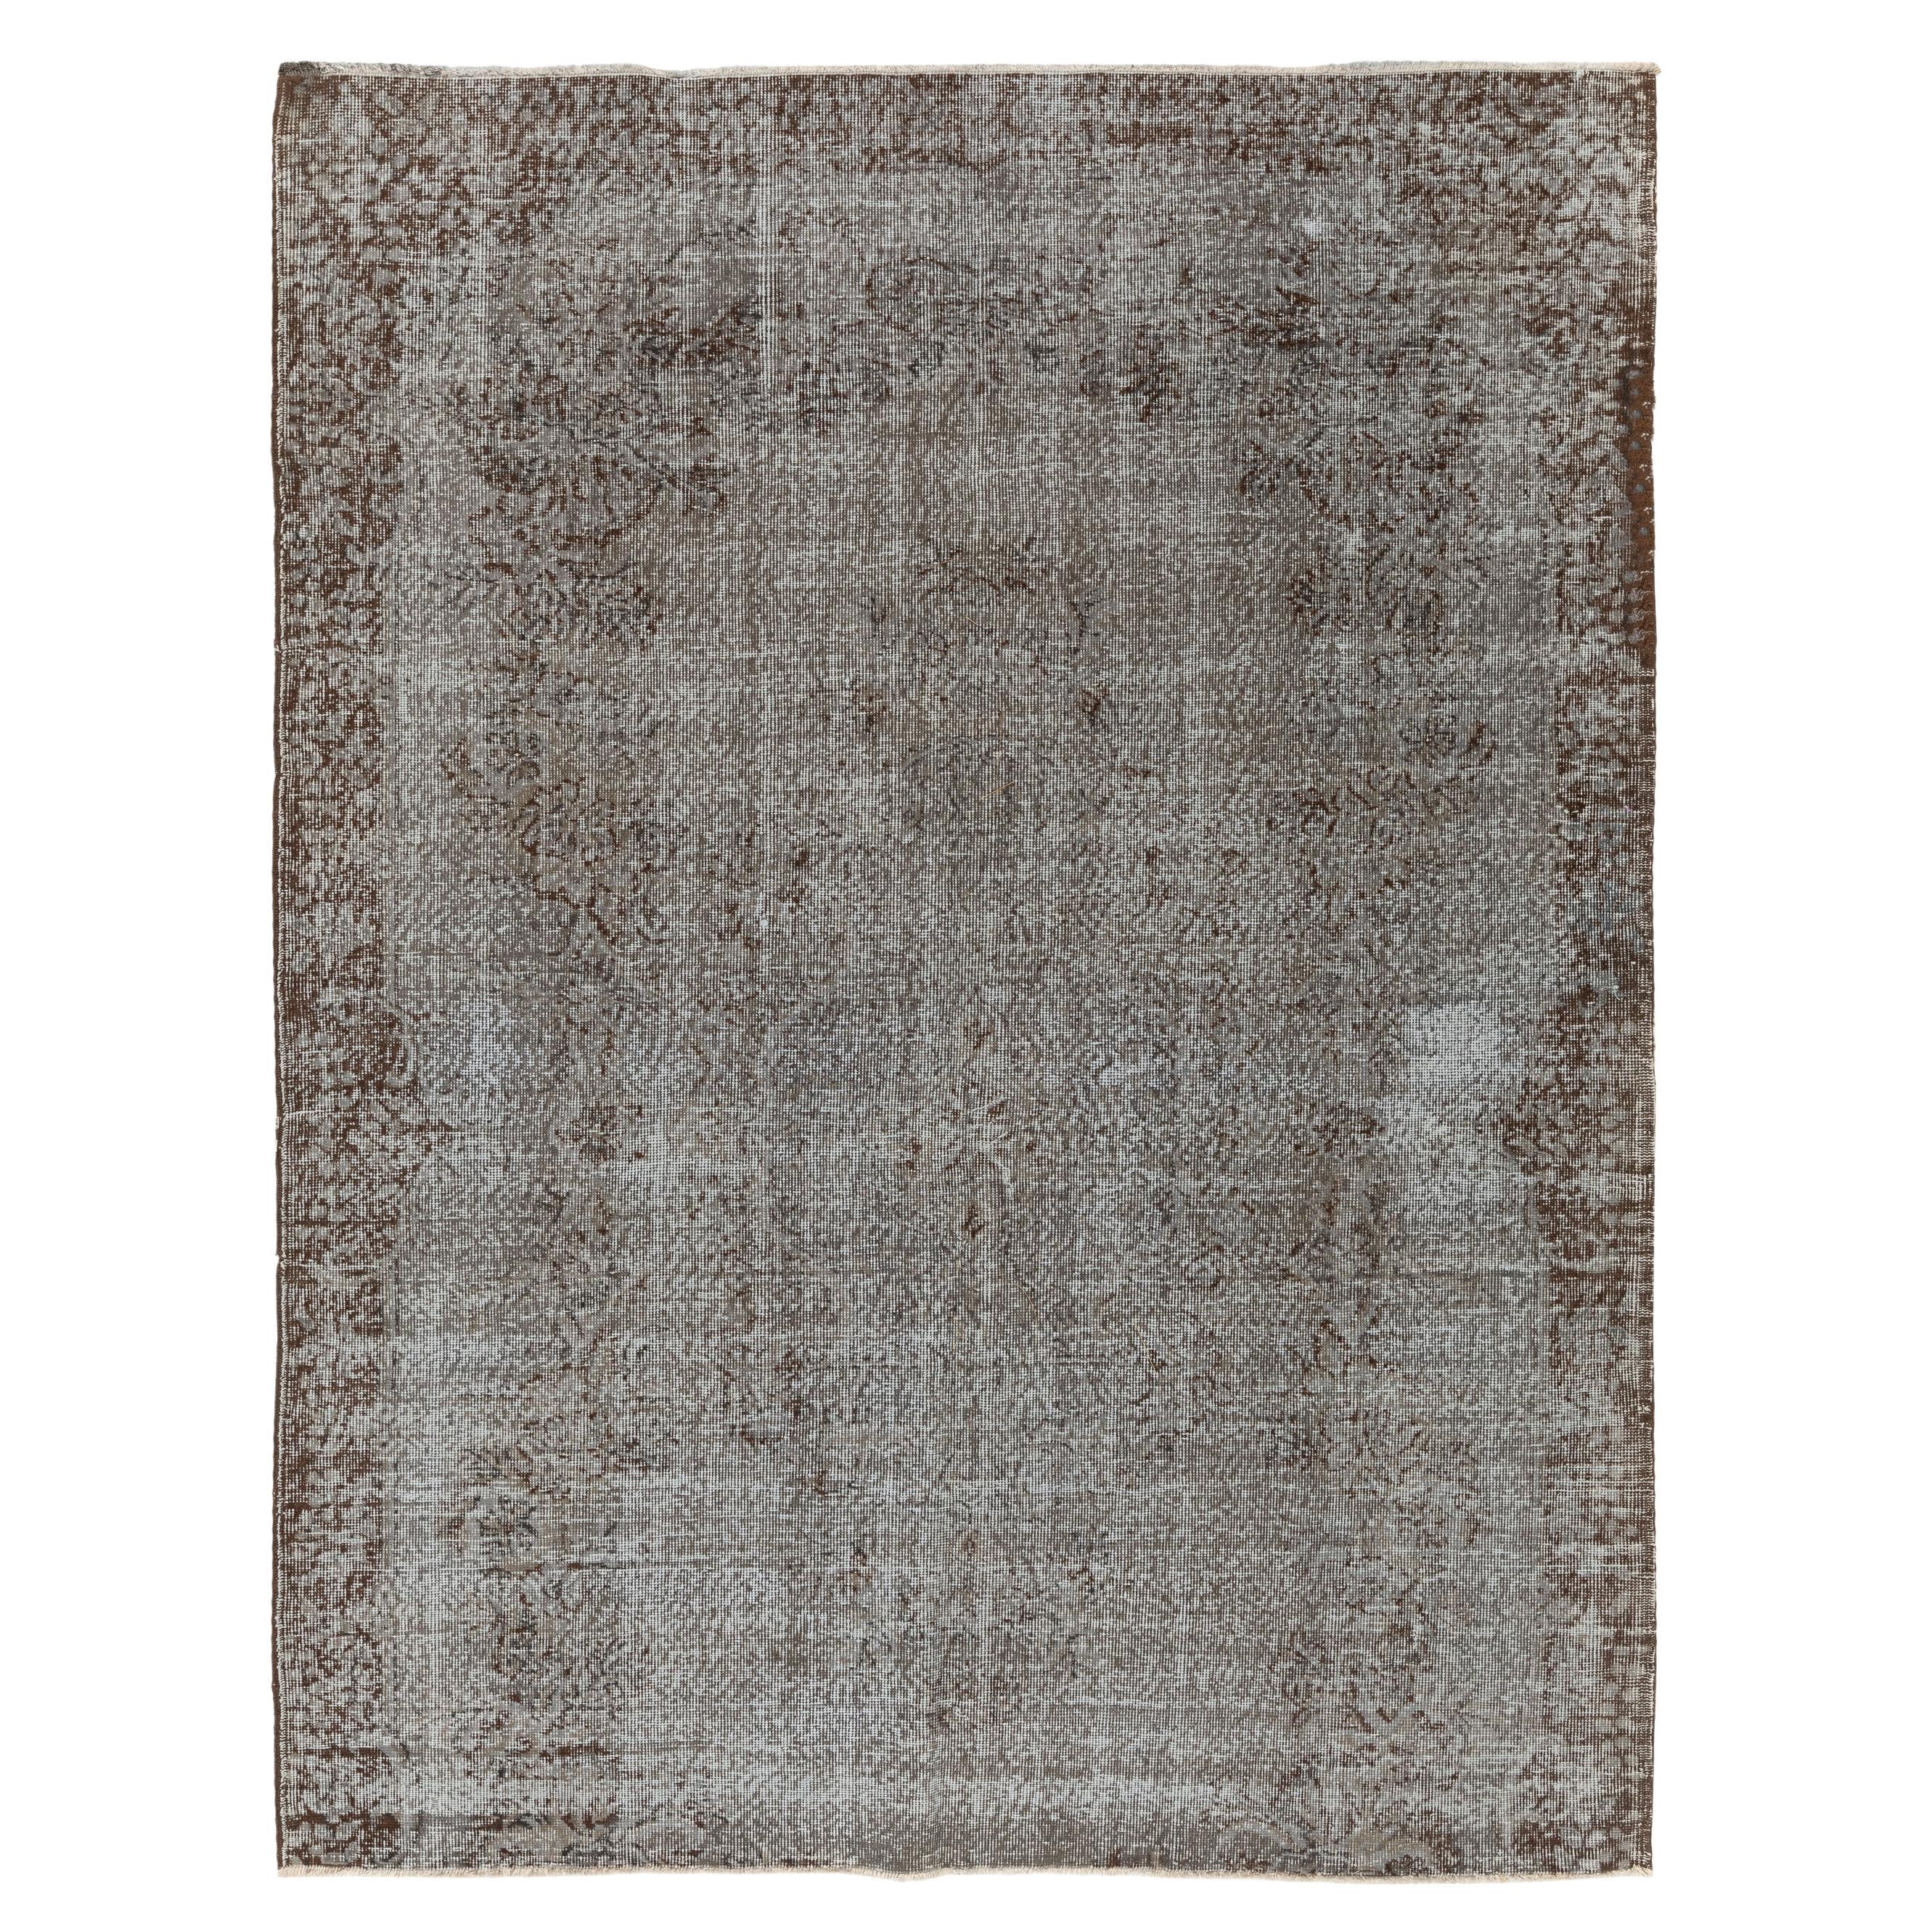 6.3x8.2 Ft Distressed Handmade Turkish Rug in Gray, Vintage Shabby Chic Carpet For Sale